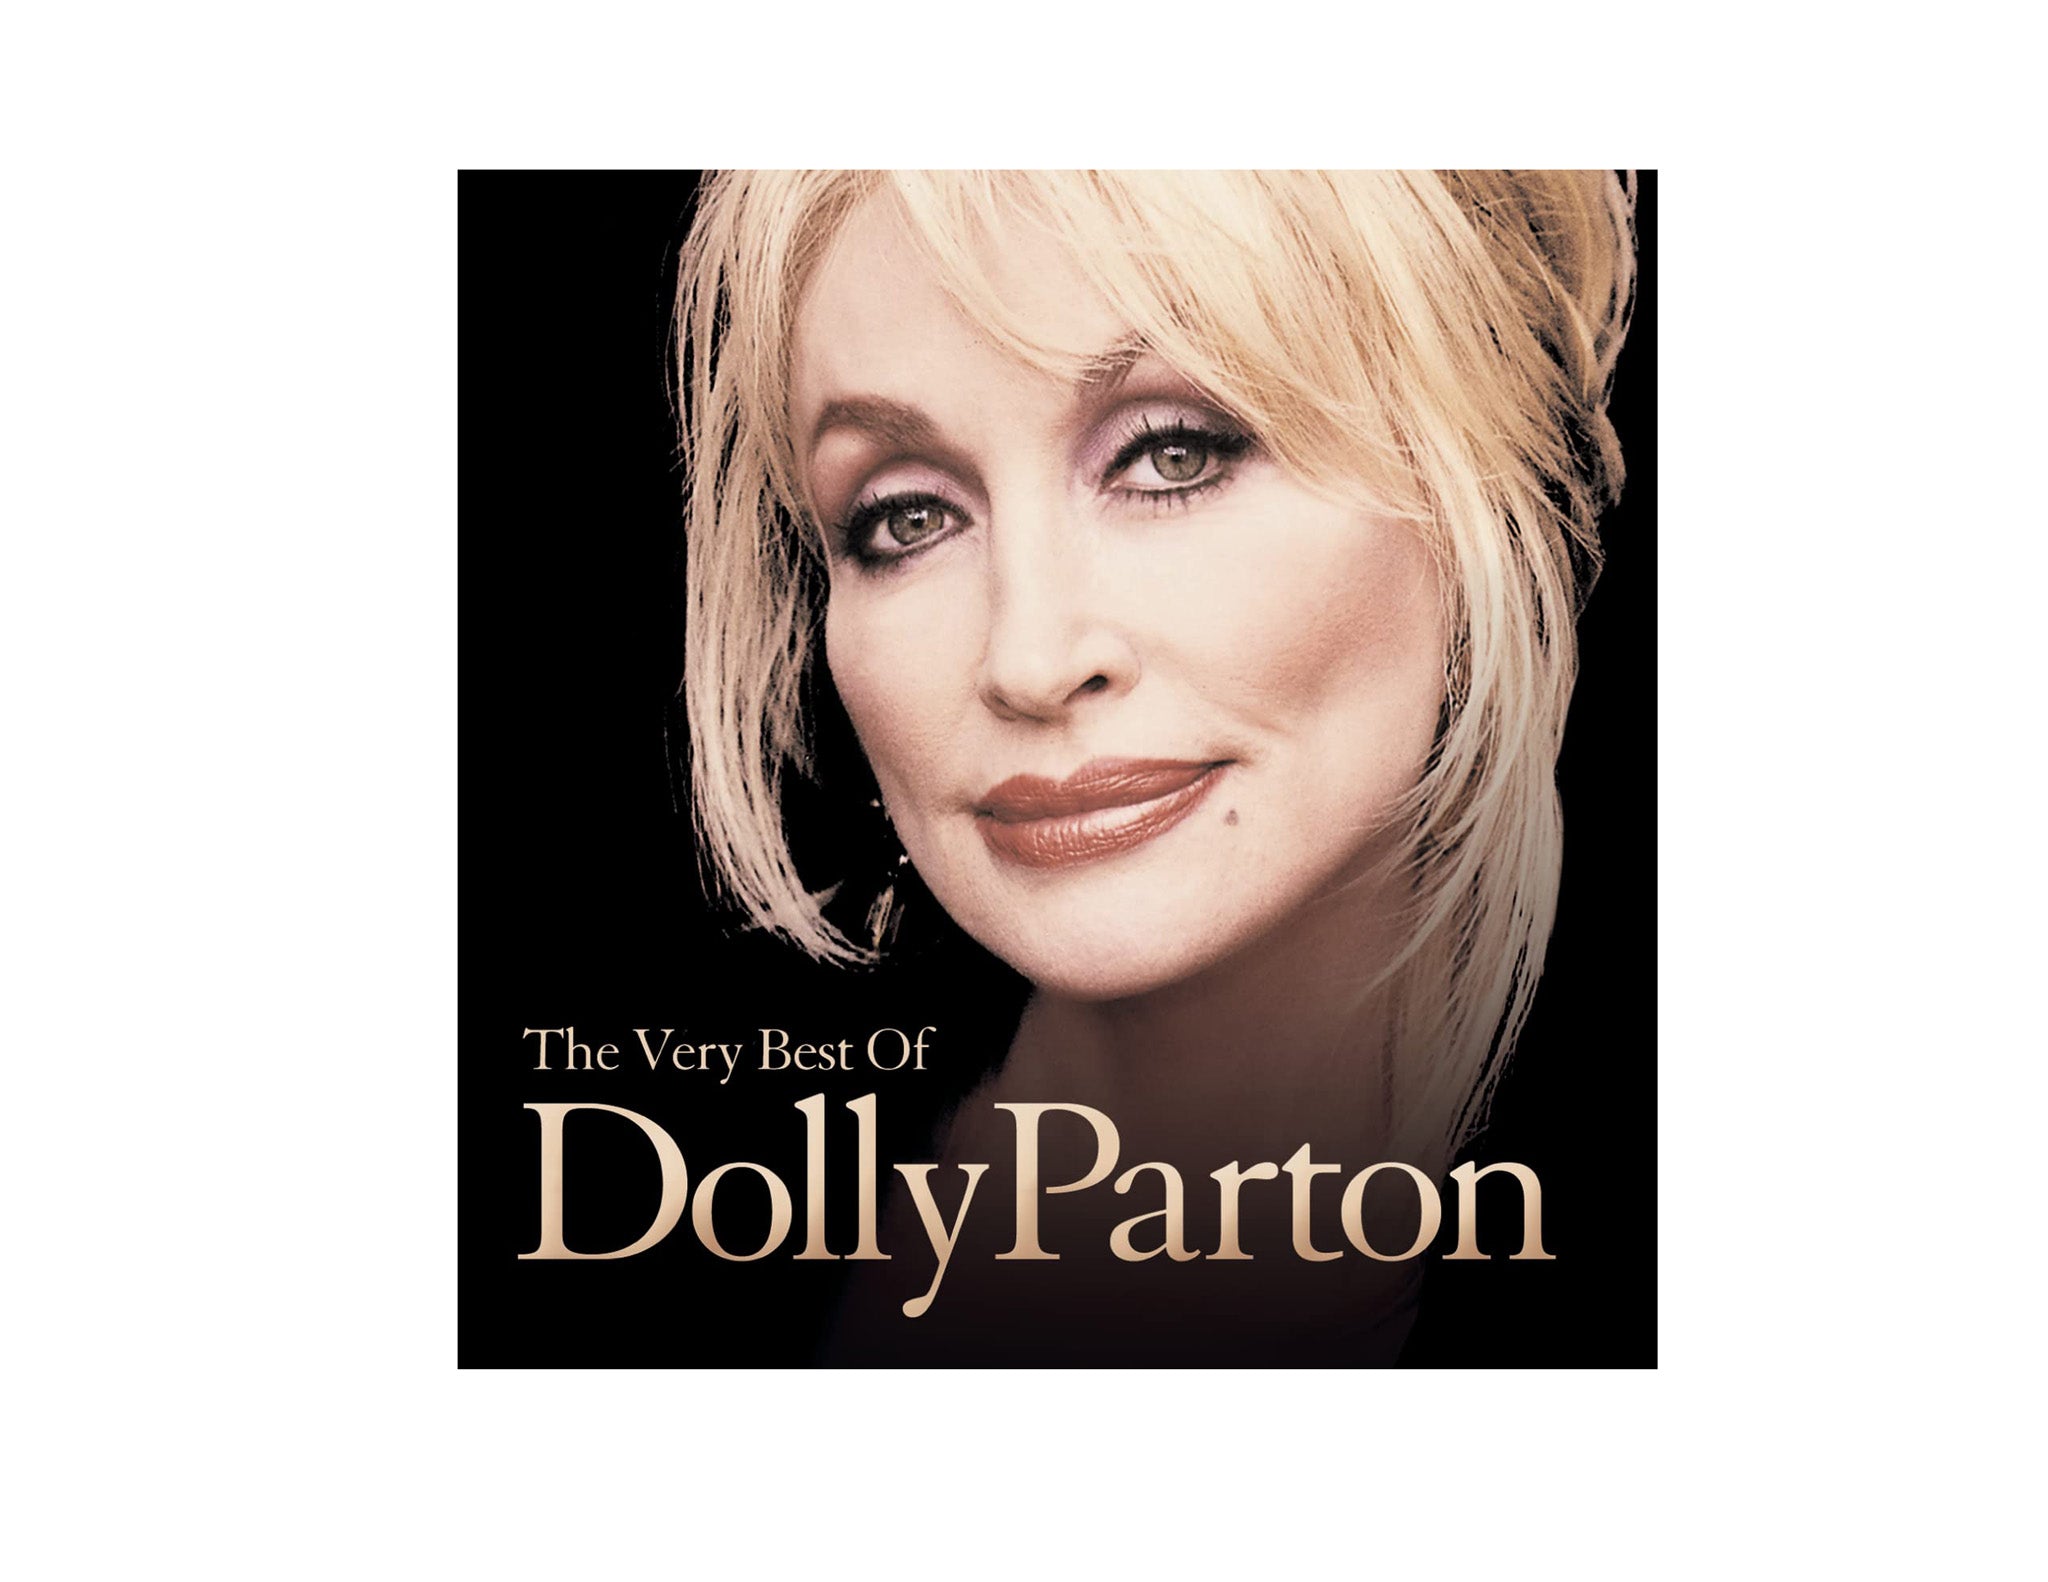 The Very Best of Dolly Parton (CD)